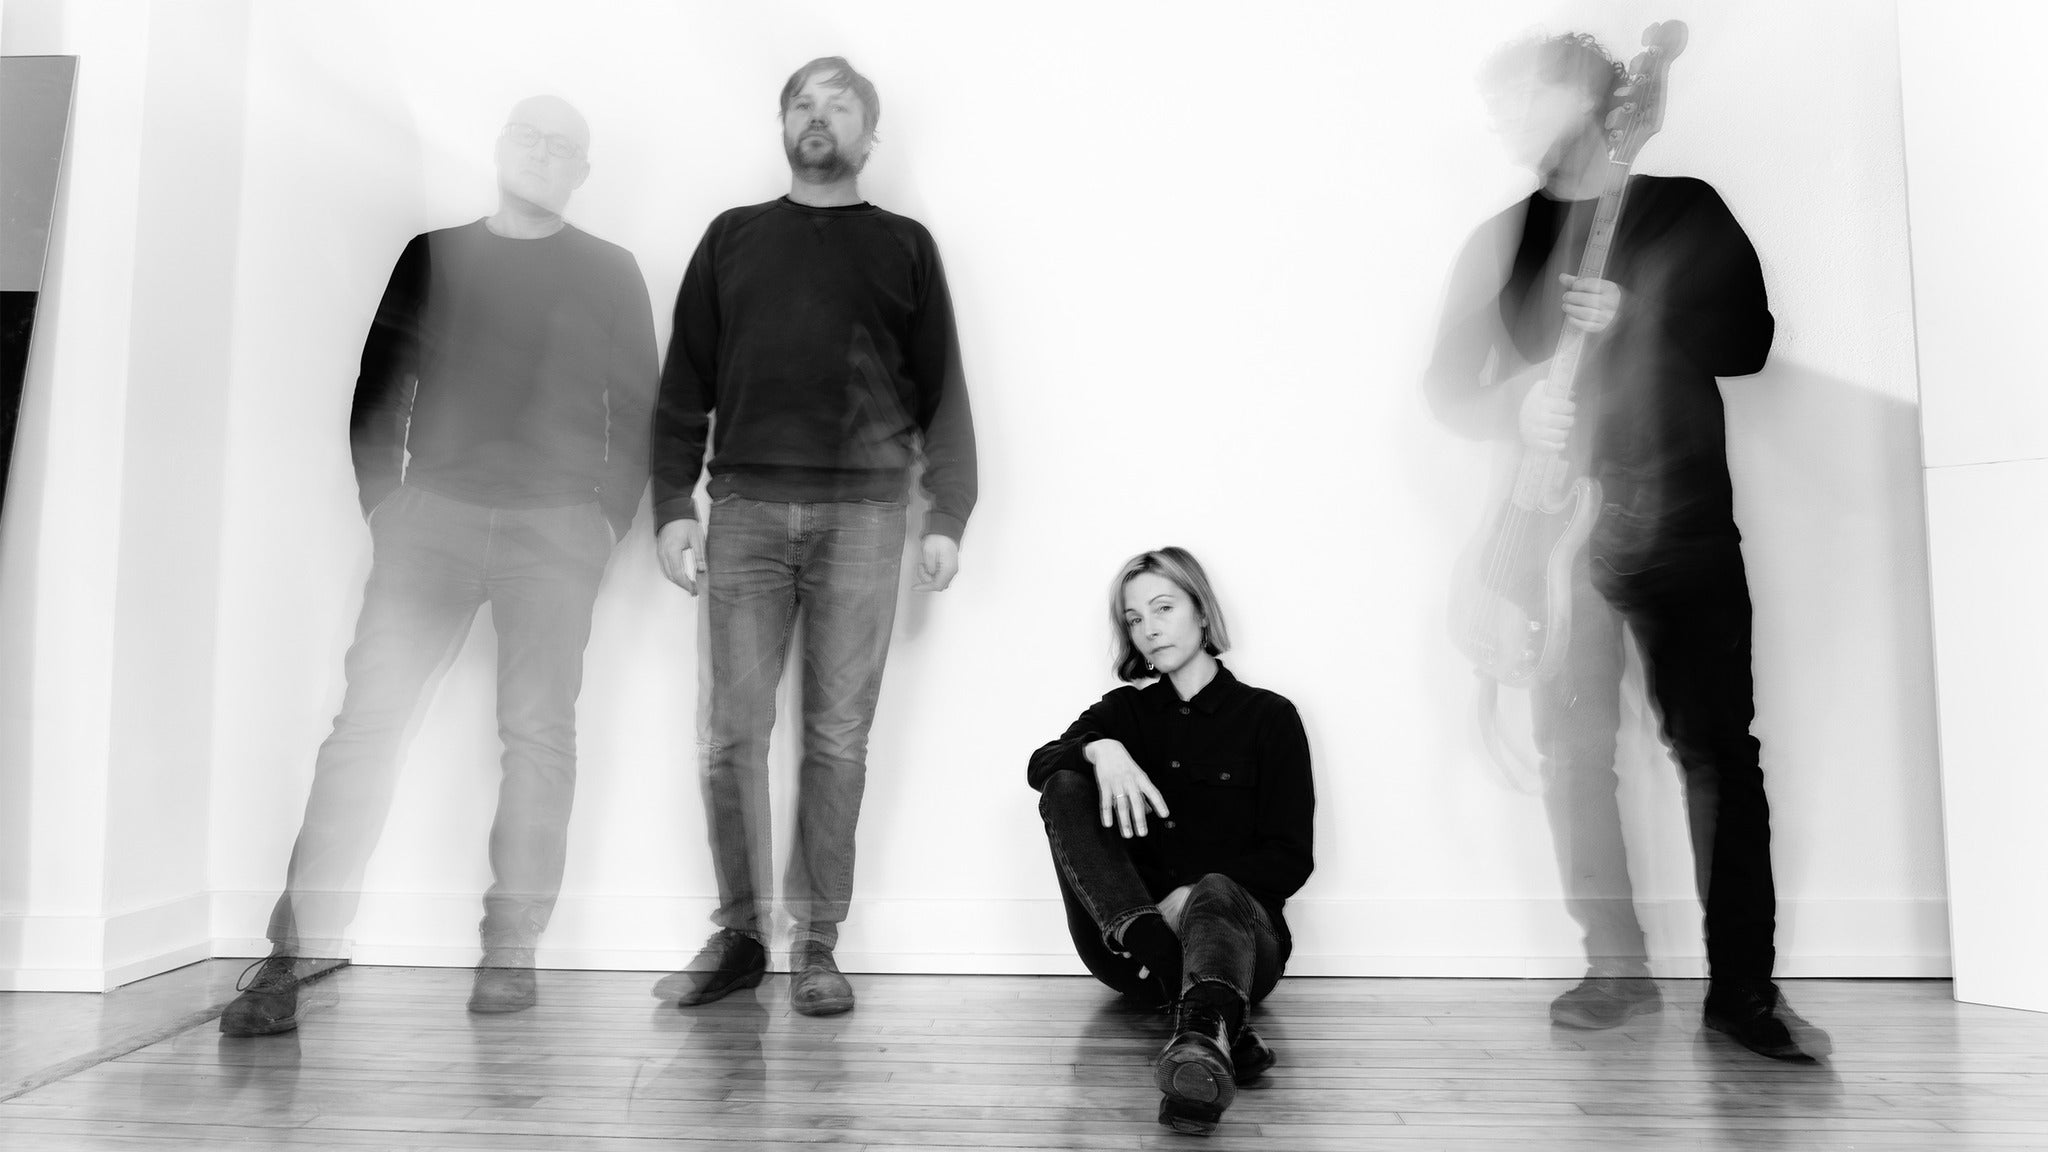 Polica in Milwaukee promo photo for Exclusive presale offer code